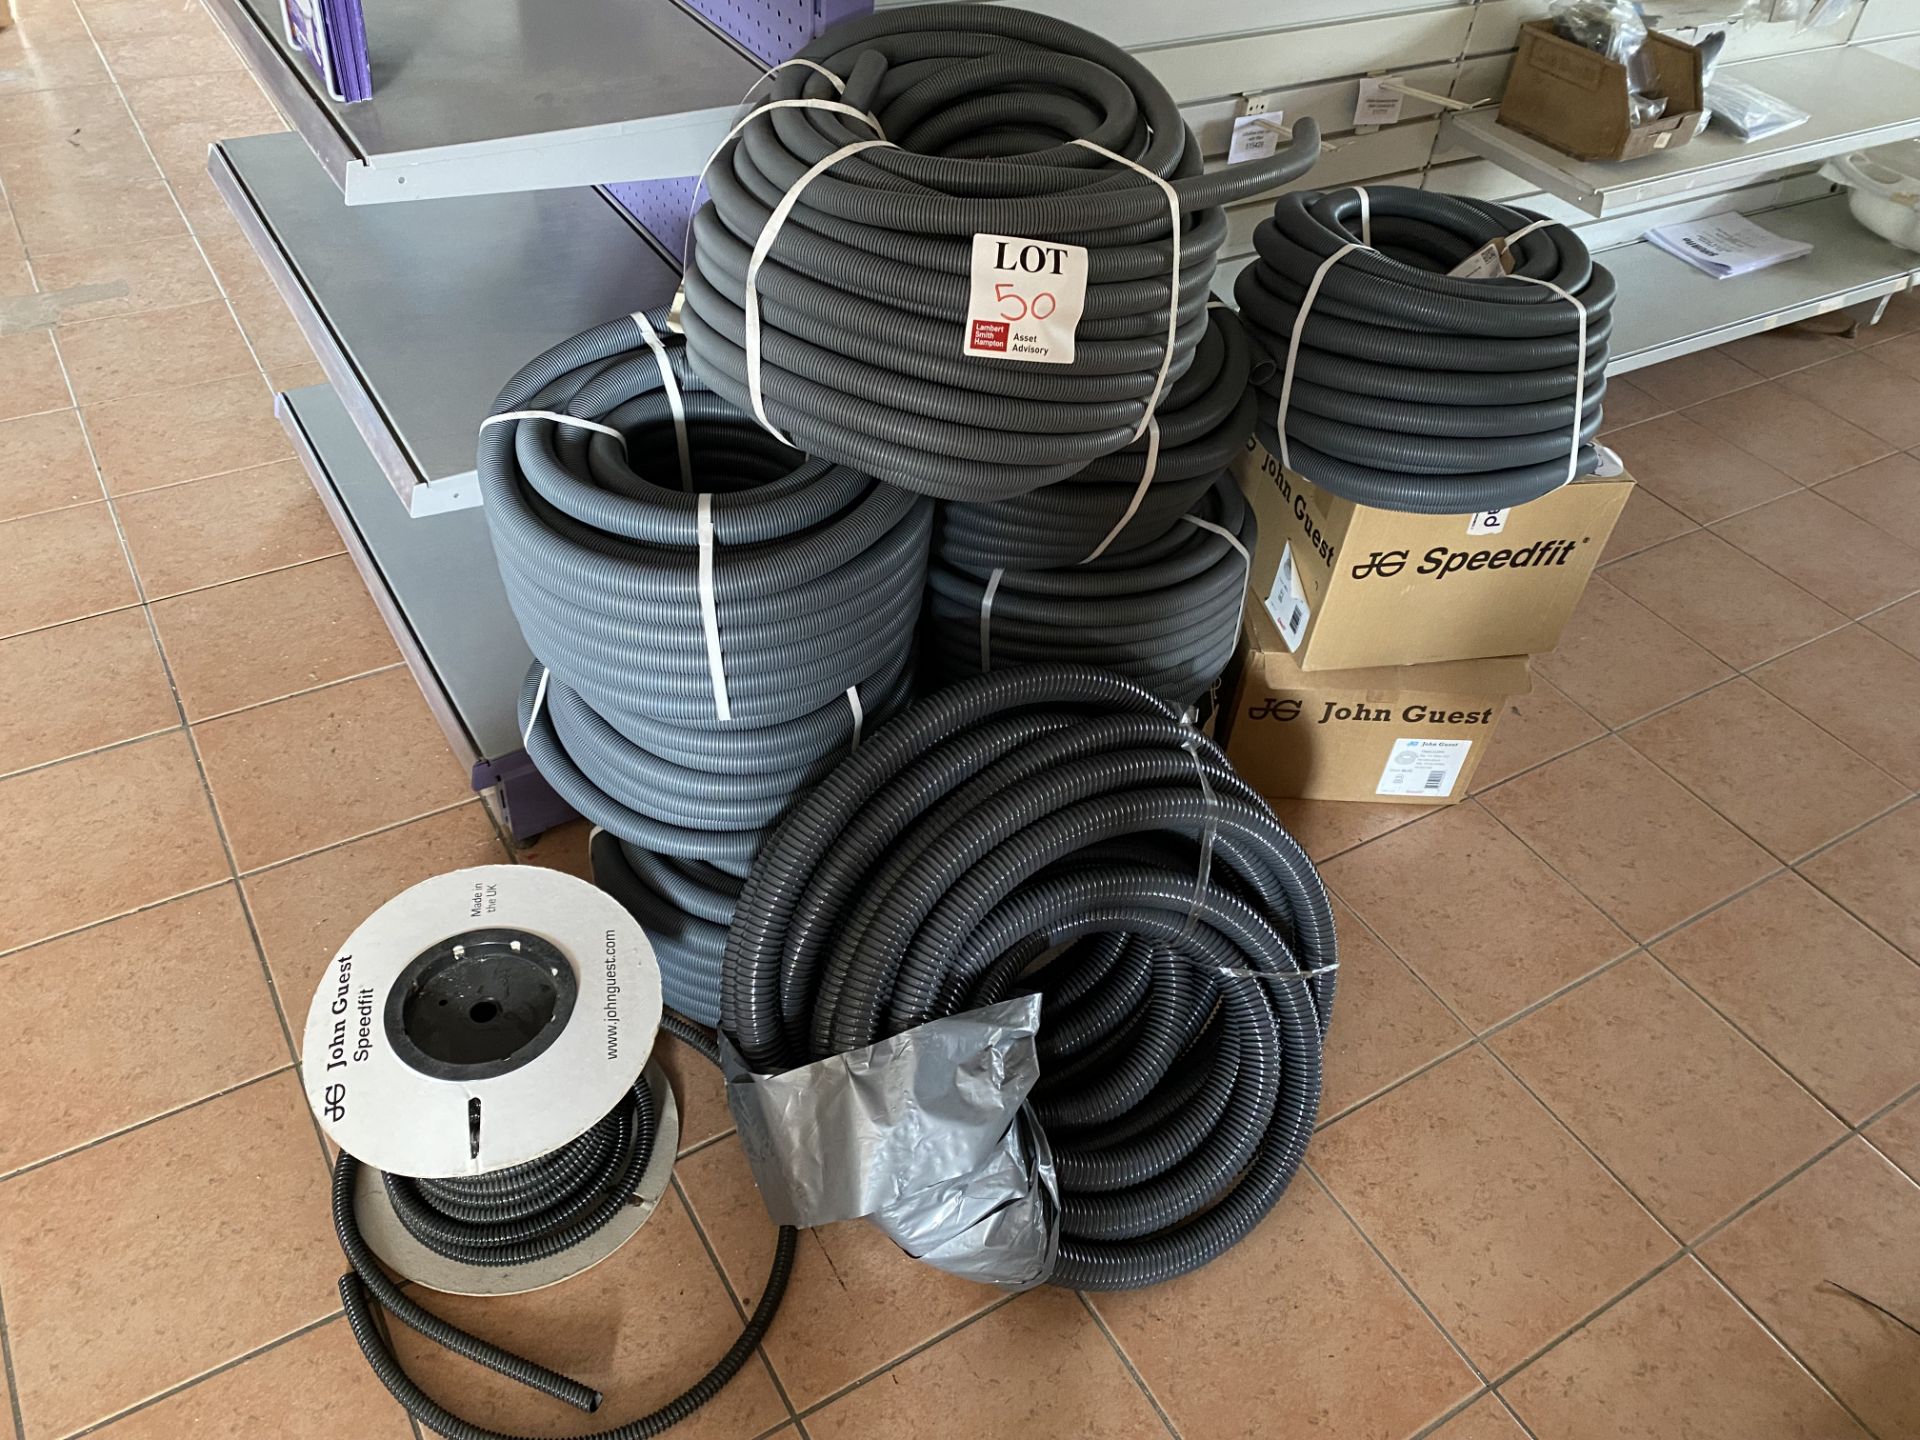 Approx ten reels of various sized plastic piping